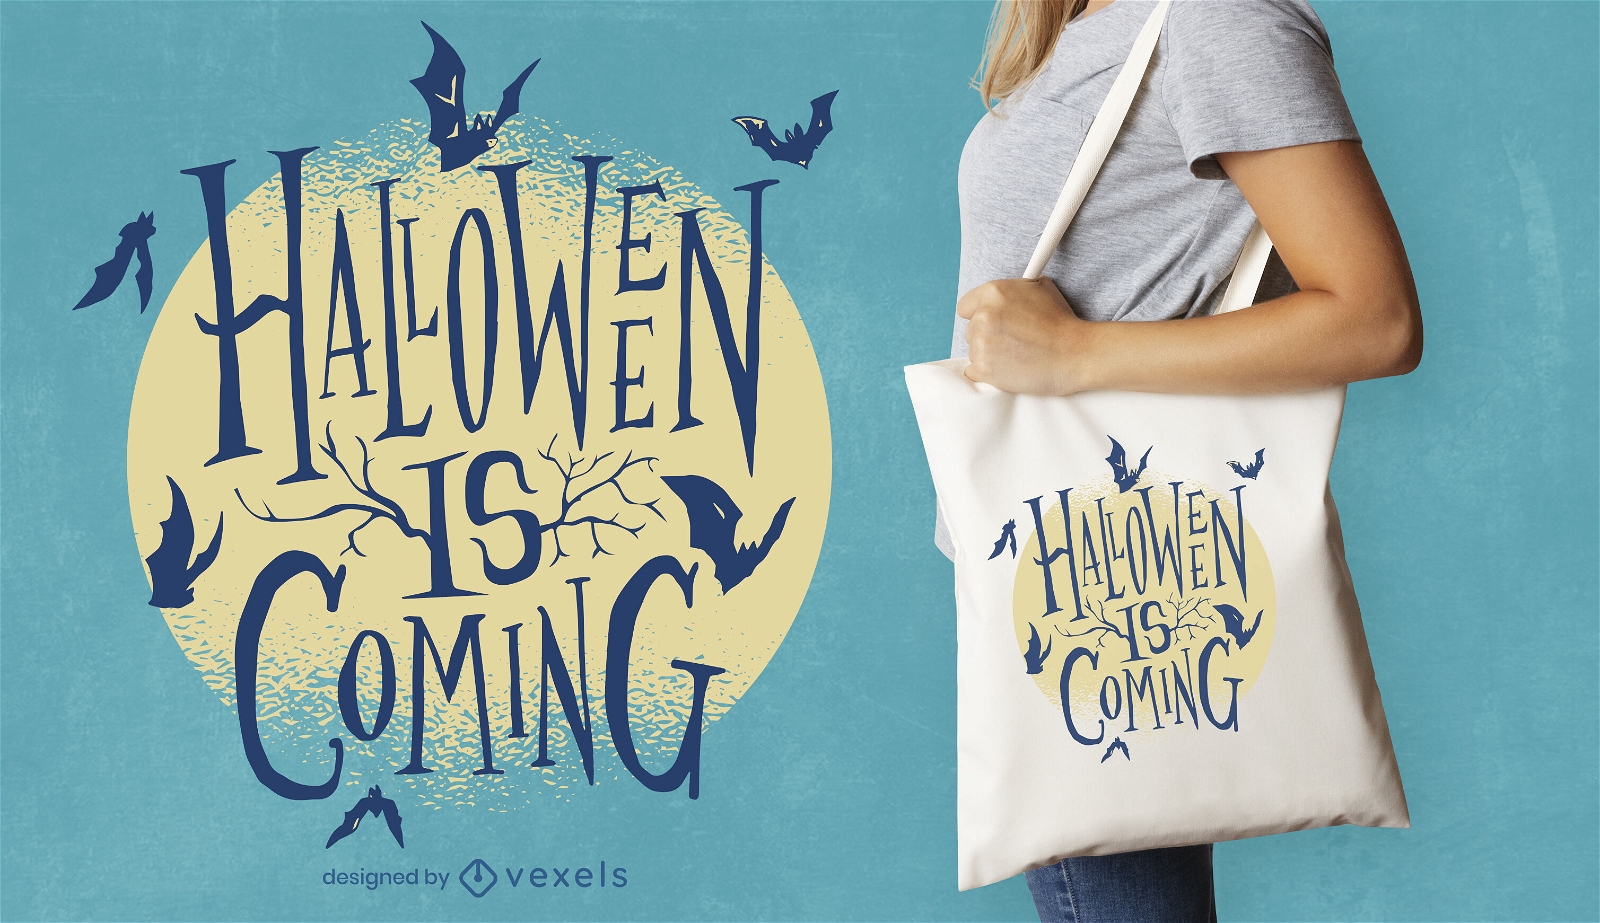 Halloween is coming lettering tote bag